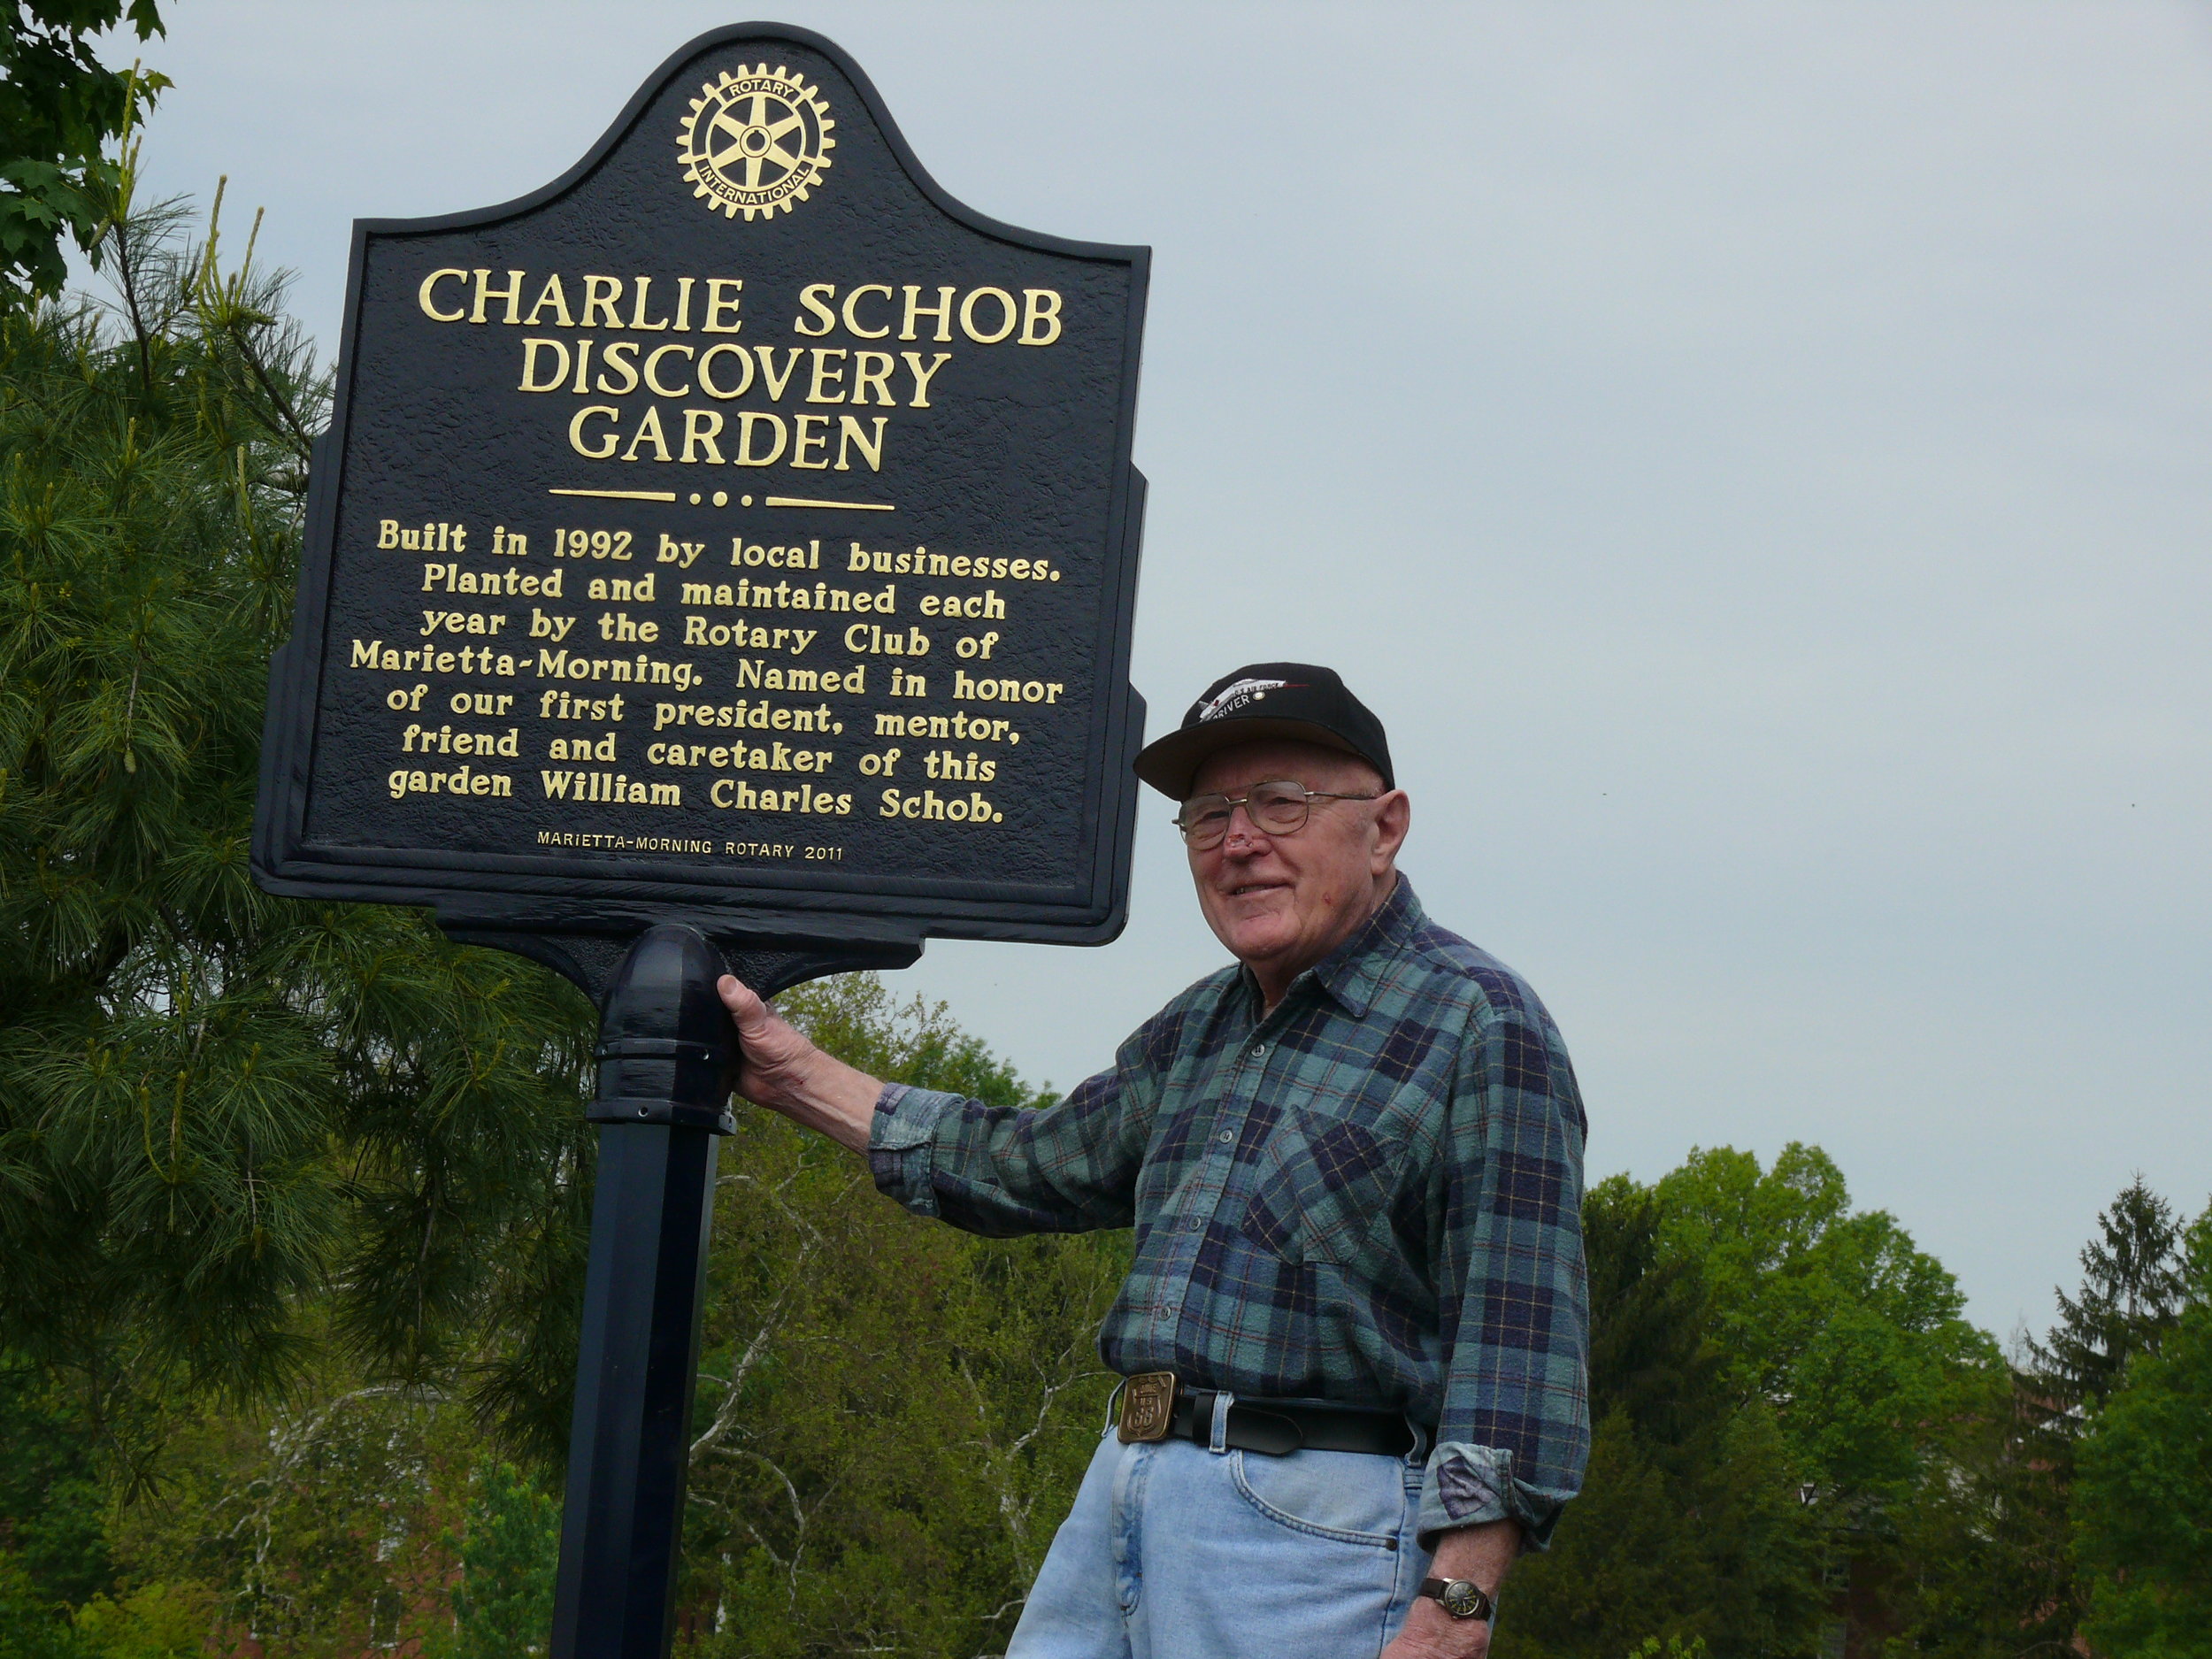 Charlie Schob at the Discovery Garden Dedication